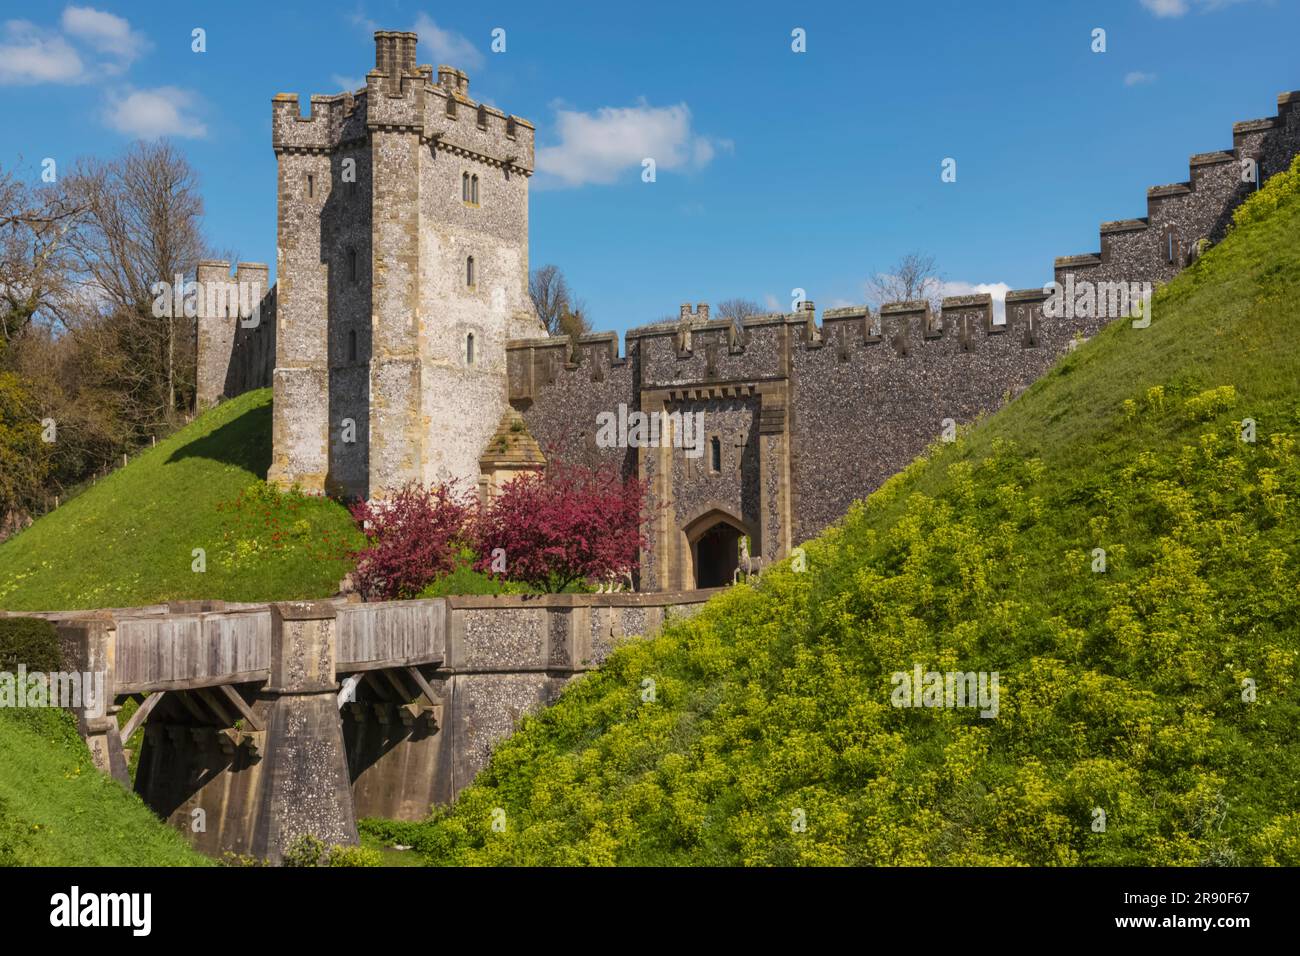 England, Sussex, West Sussex, Arundel, Arundel Castle, The Moat and Walls Stock Photo